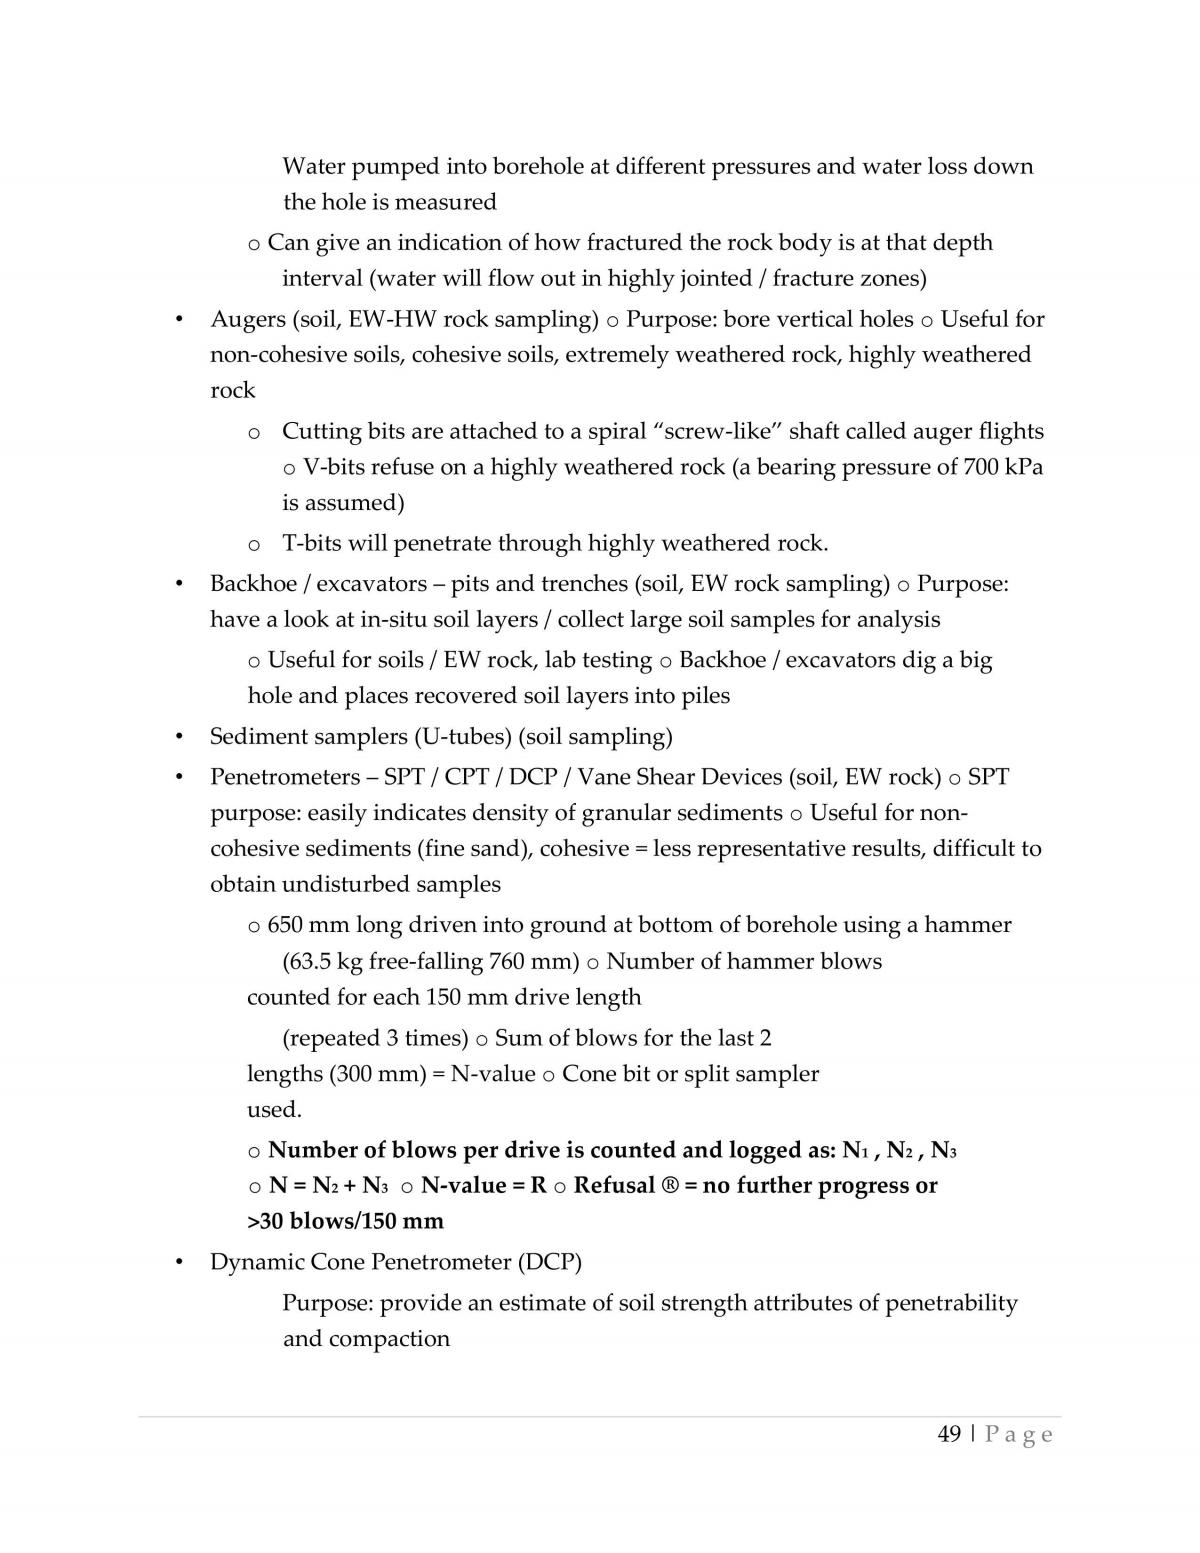 GEOL1501 Complete Course Notes - Page 49